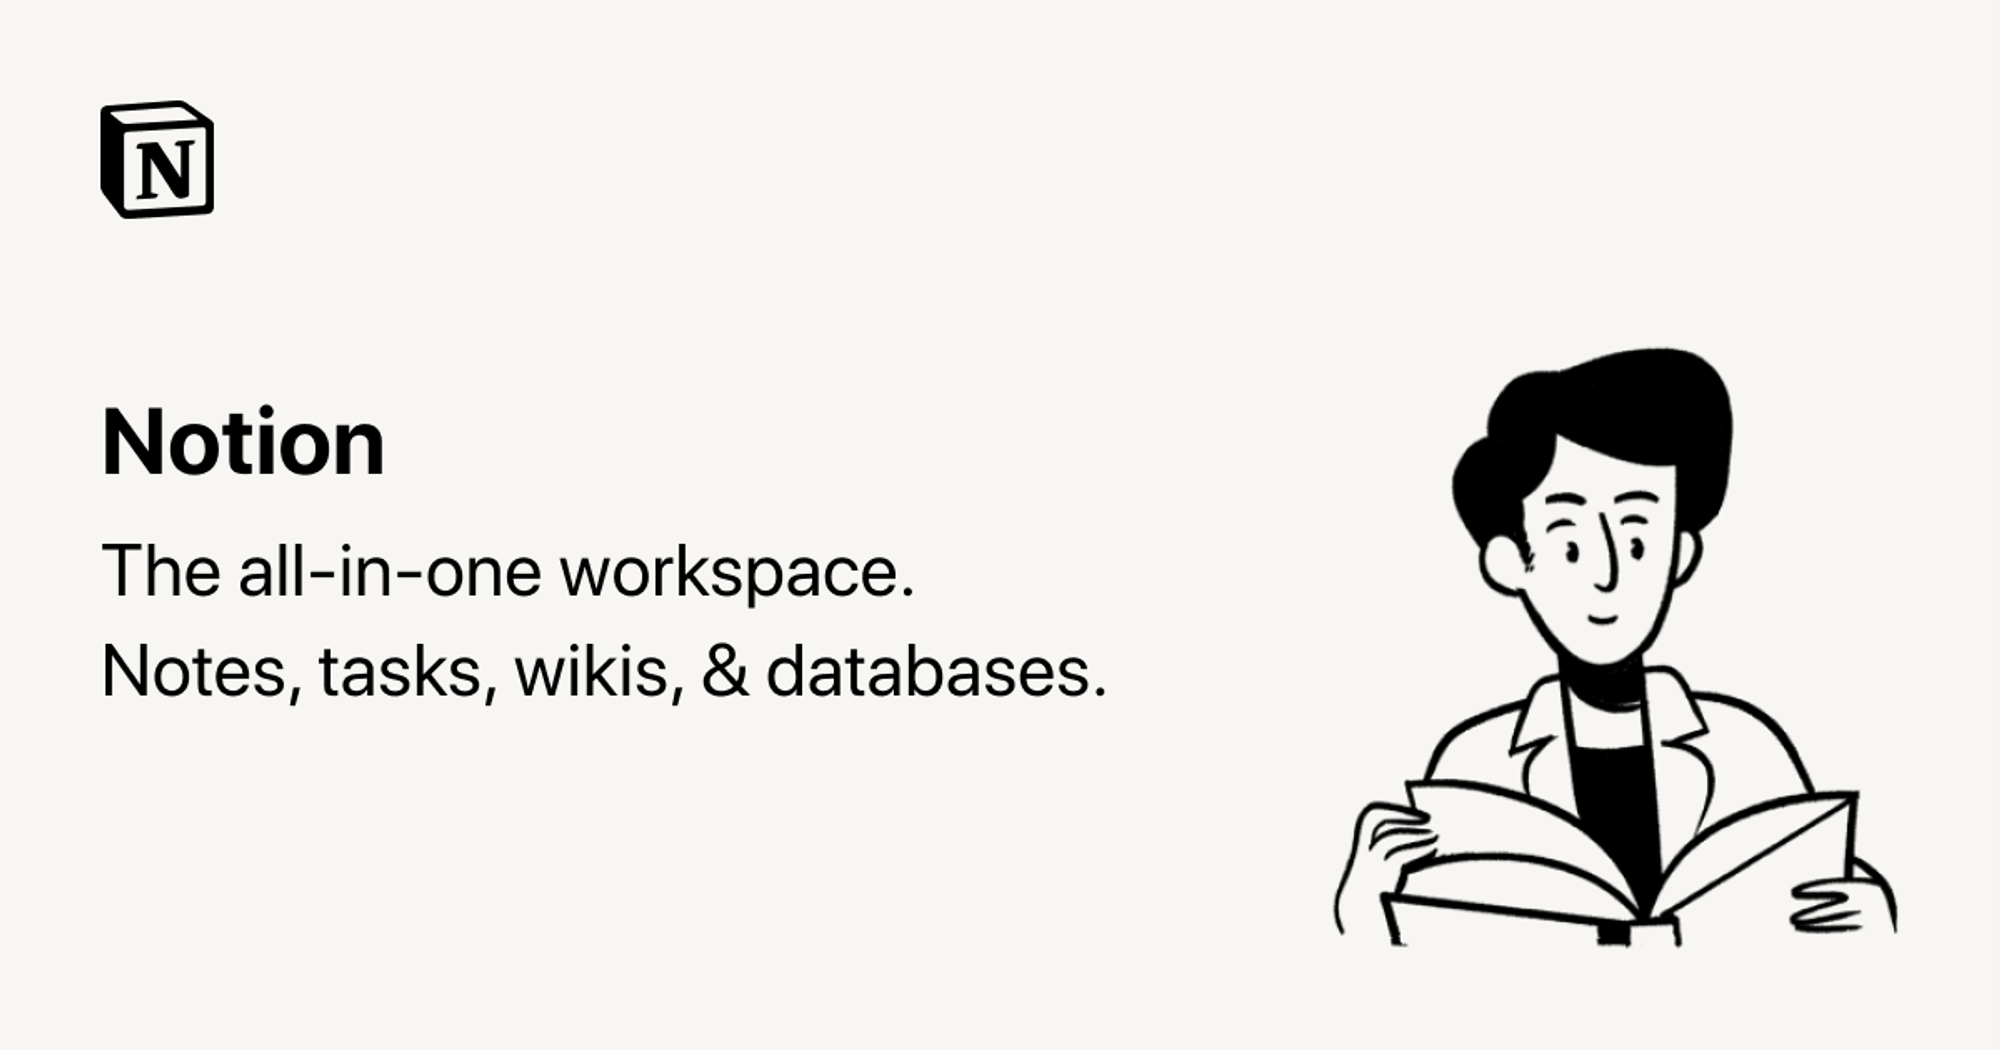 Your wiki, docs & projects. Together.